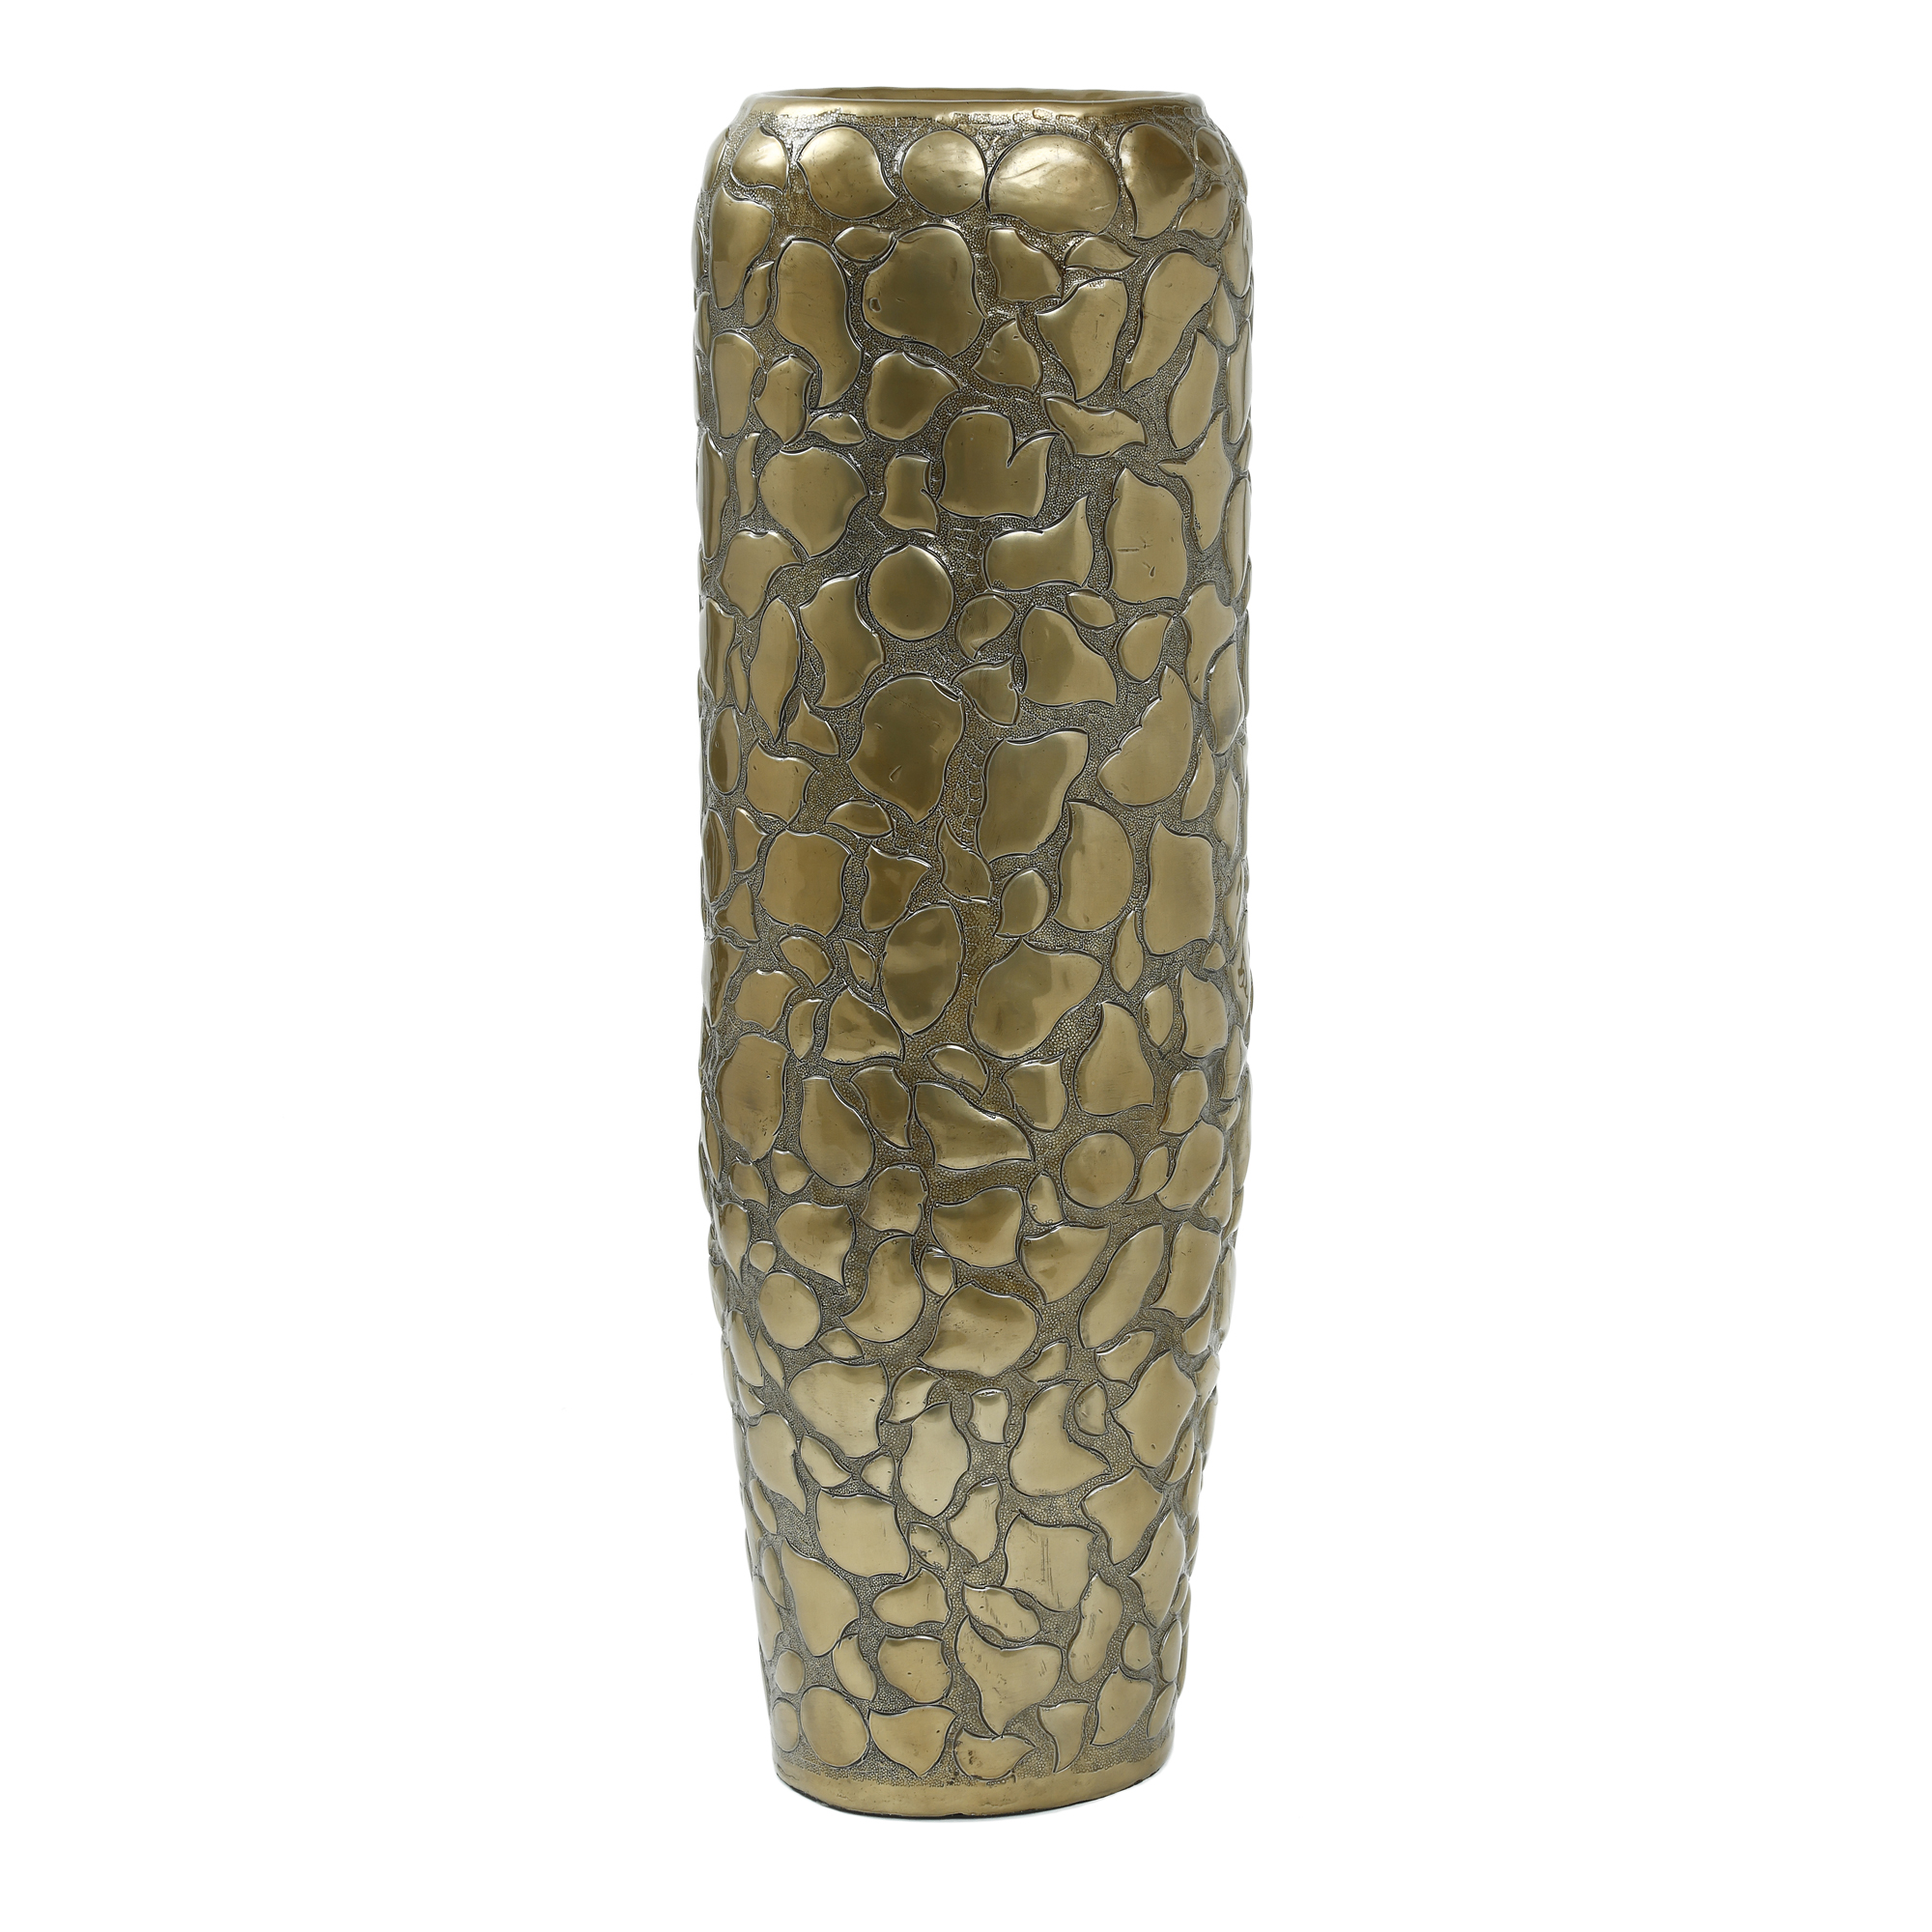 Axis Brass casted alu pot with stone pattern round